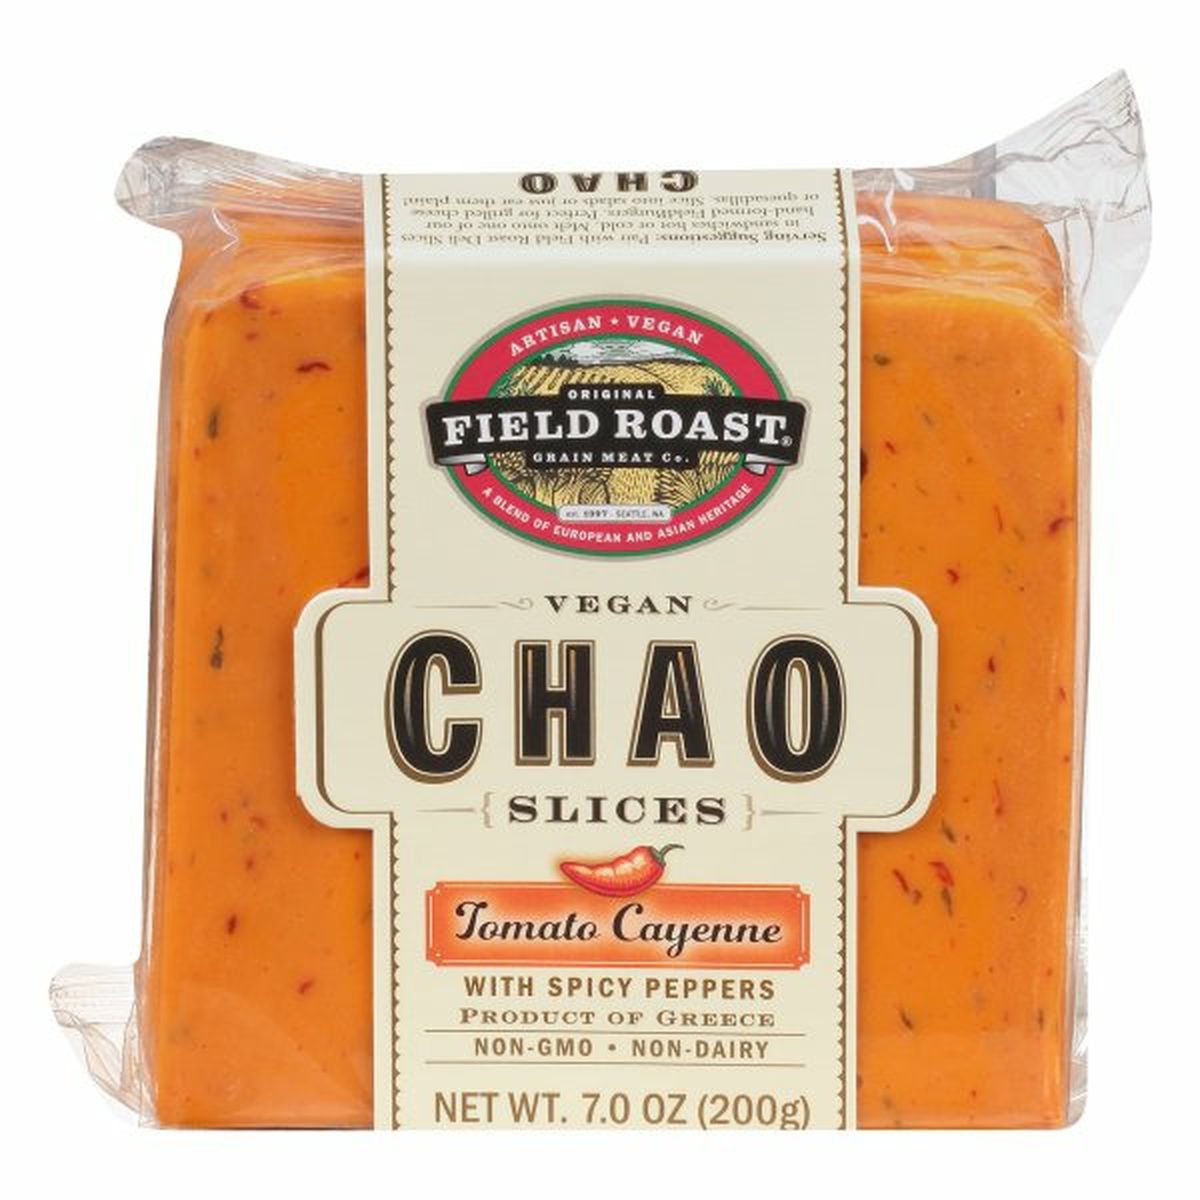 Calories in Field Roast Chao Chao Slices, Vegan, Tomato Cayenne